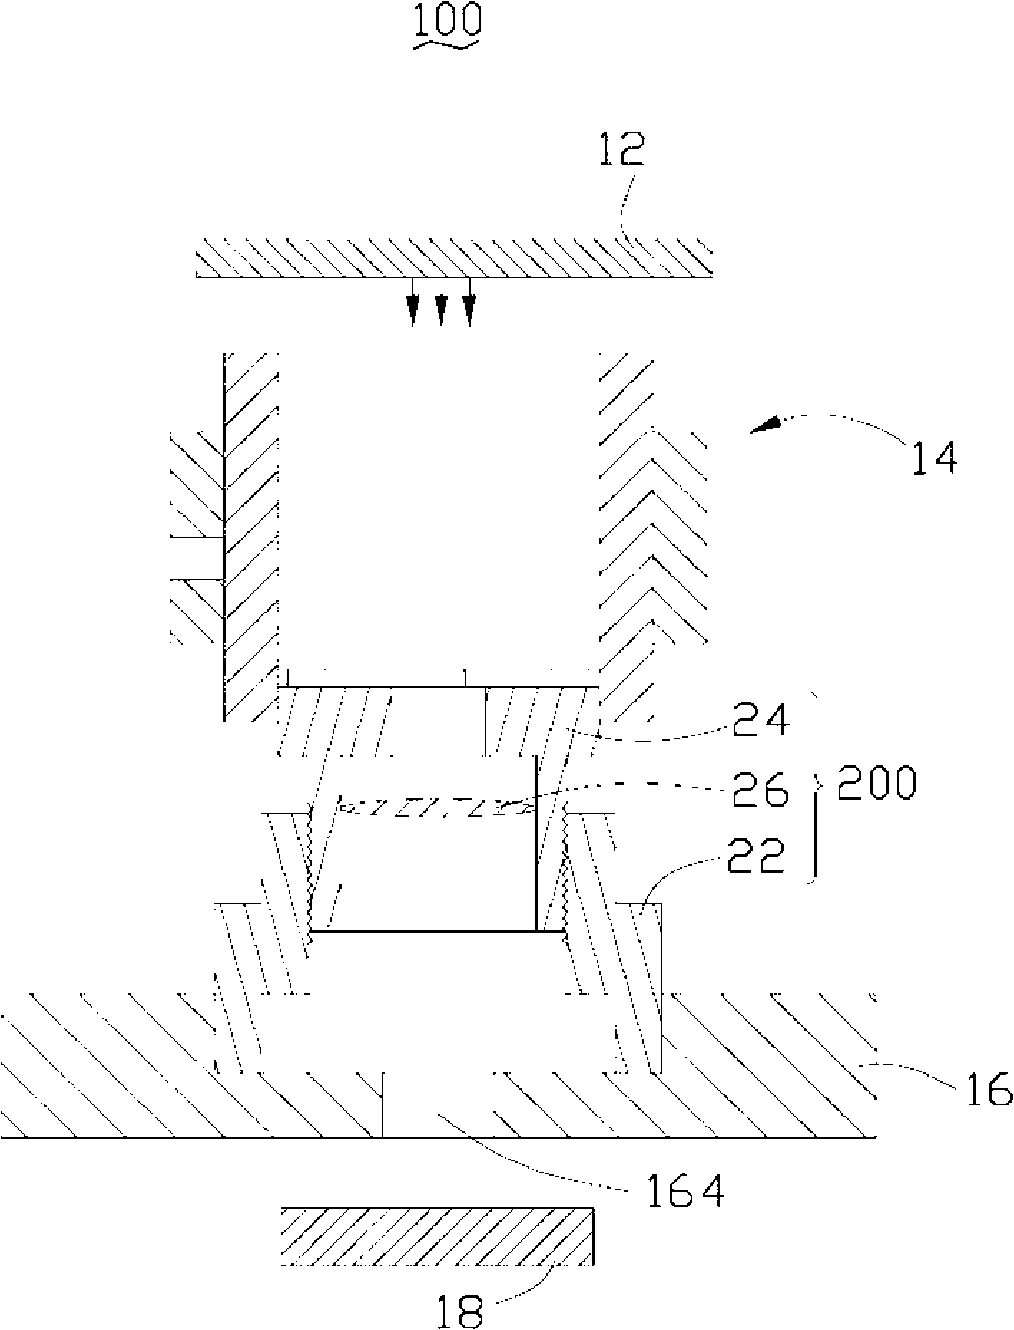 Concentricity detection device and its method